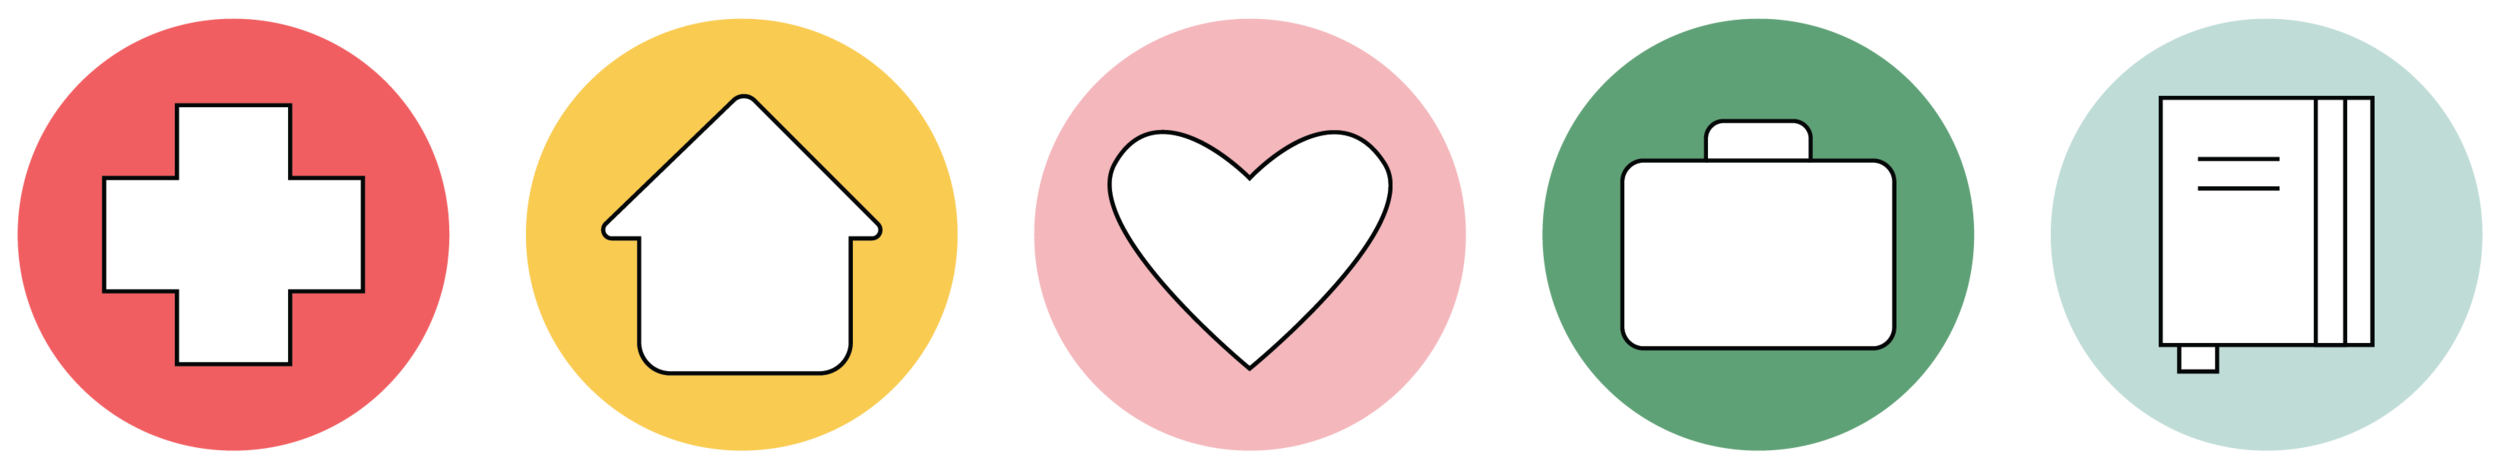 WeGive Foundation-icons-16.png